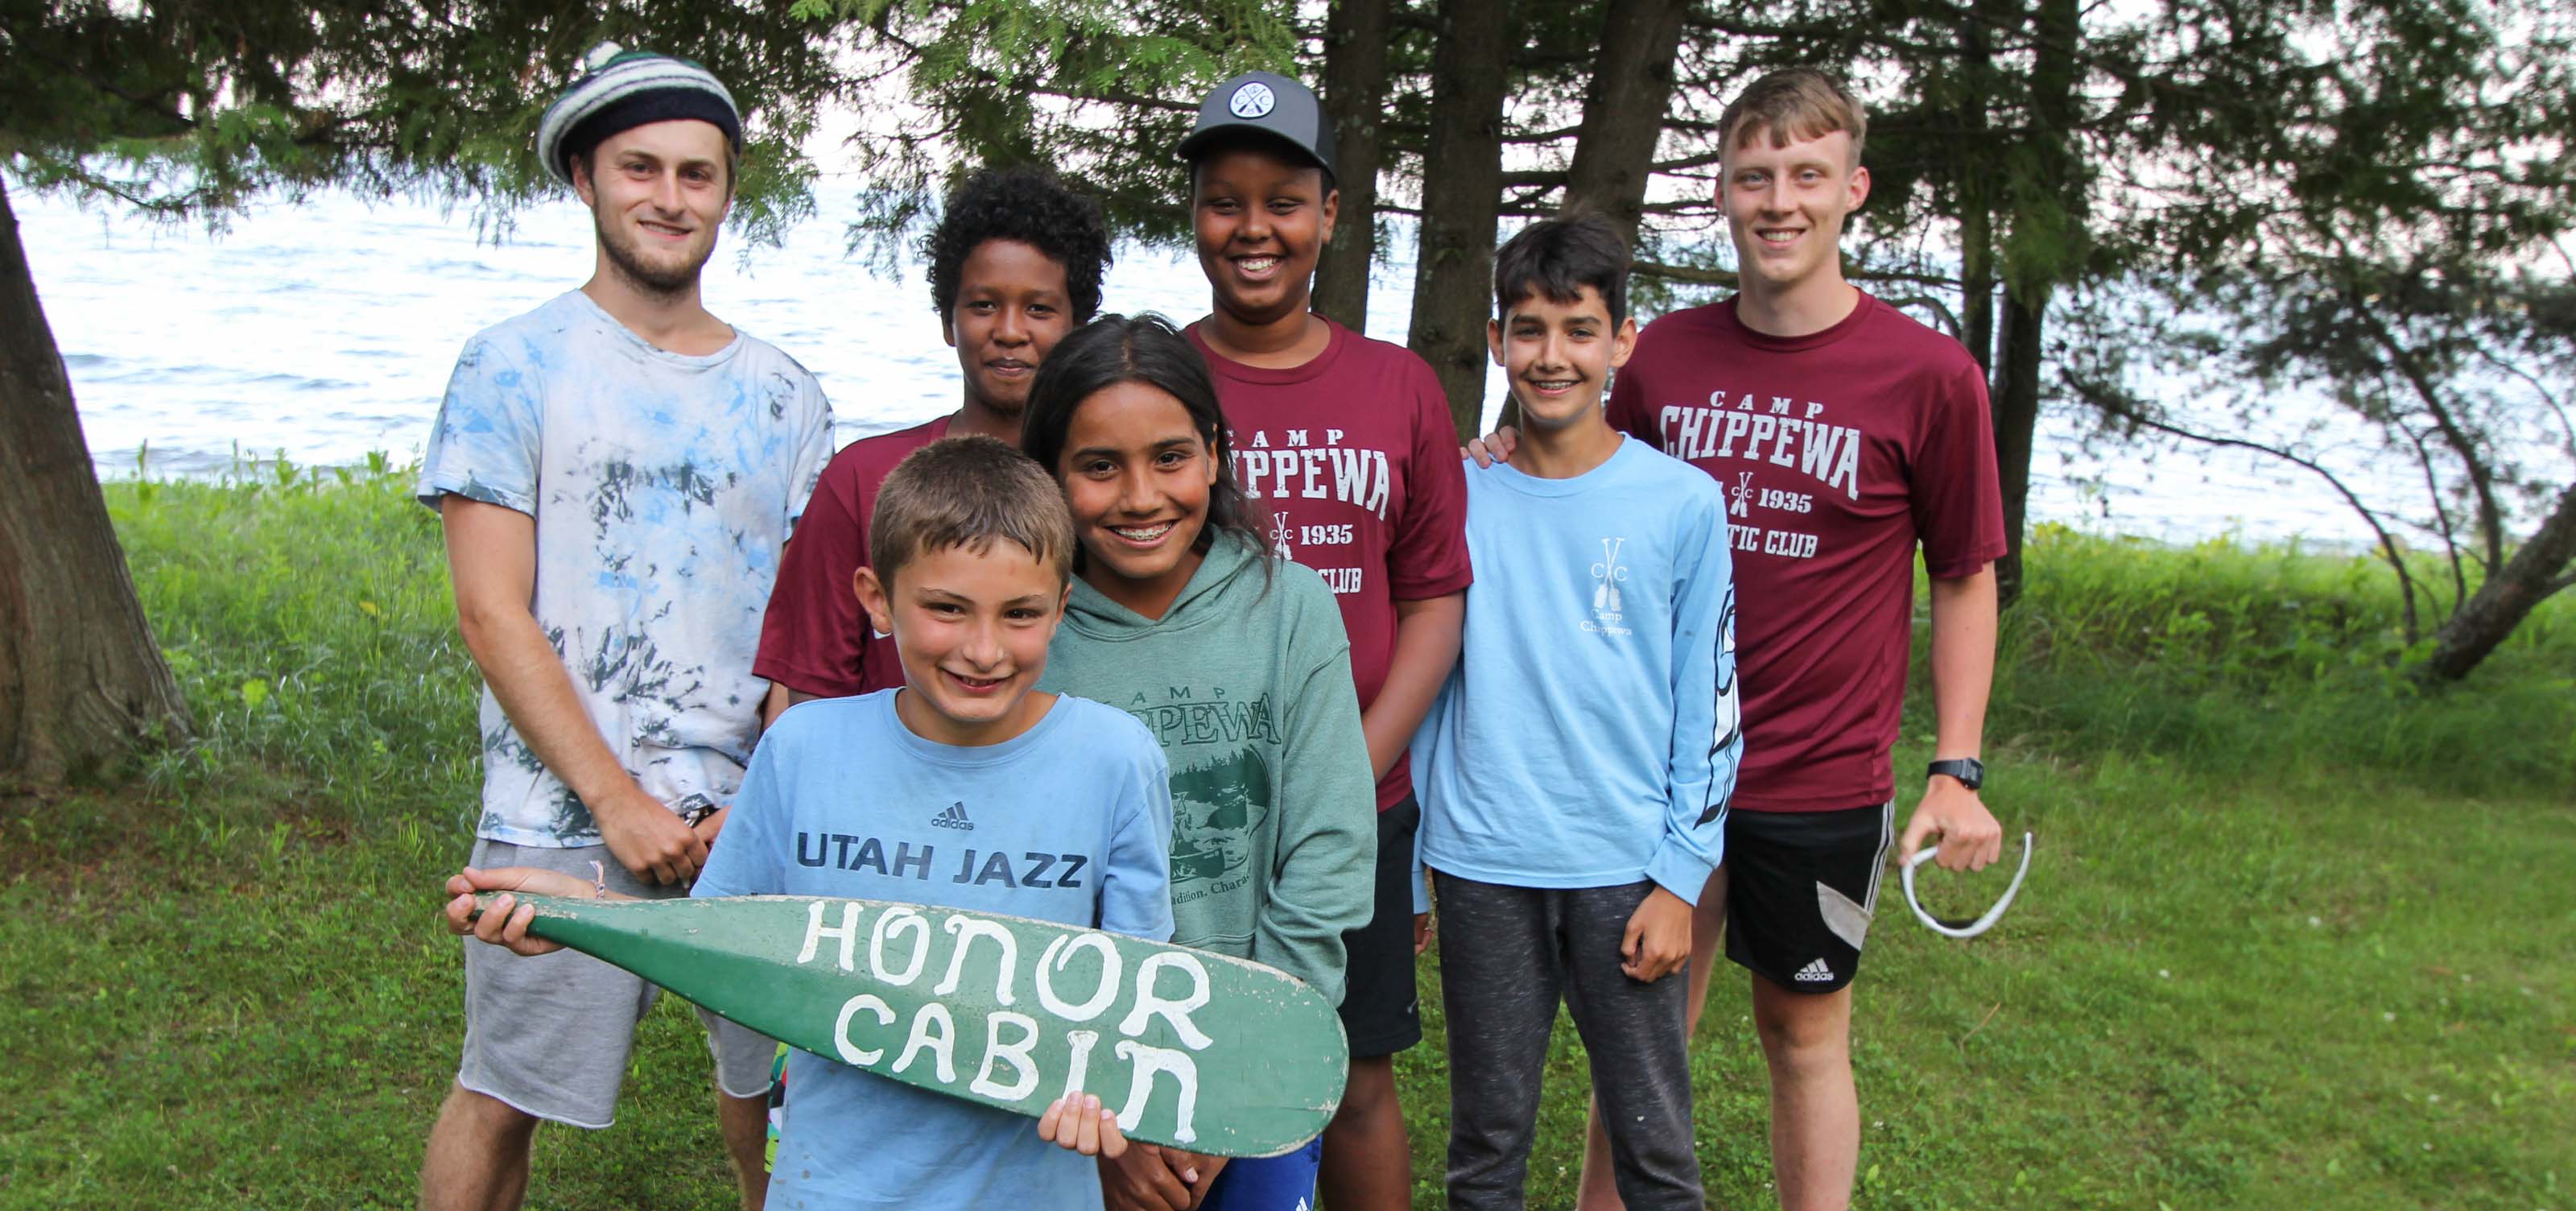 group of boys smiling with one holding a paddle that says honor cabin.